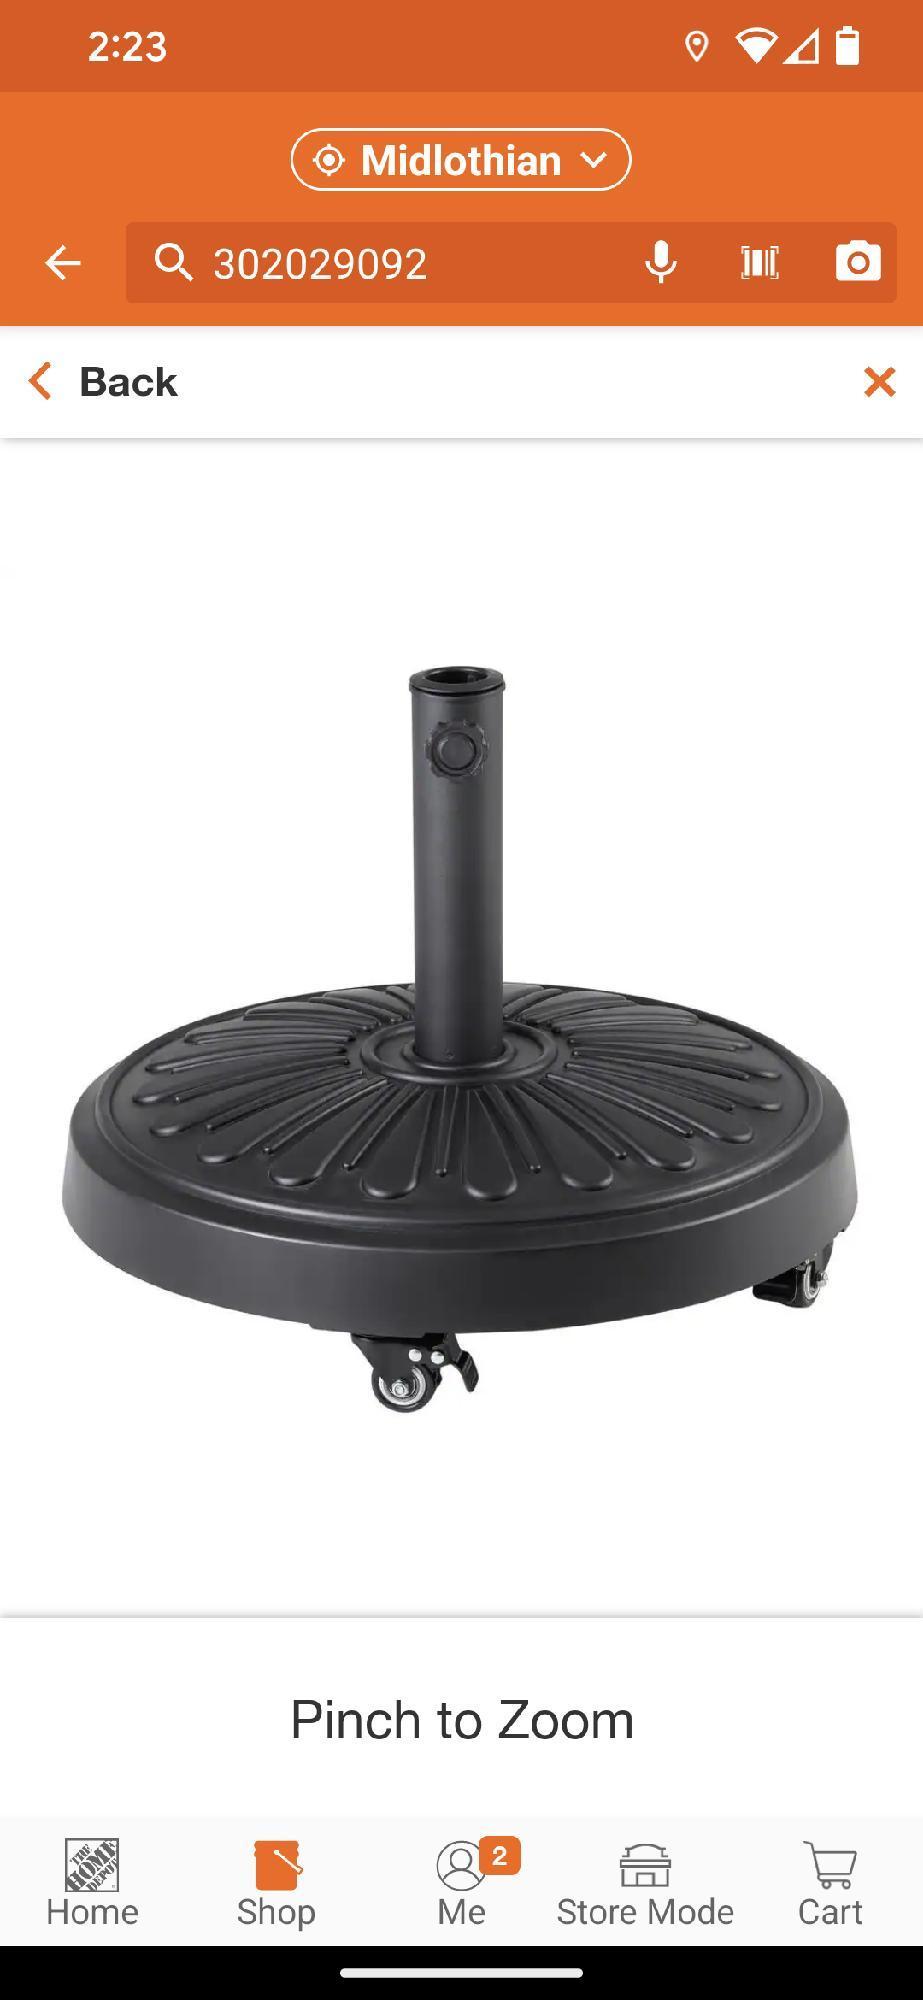 StyleWell 50 lbs. Concrete and Resin Patio Umbrella Base in Black, Appears to be New in Factory